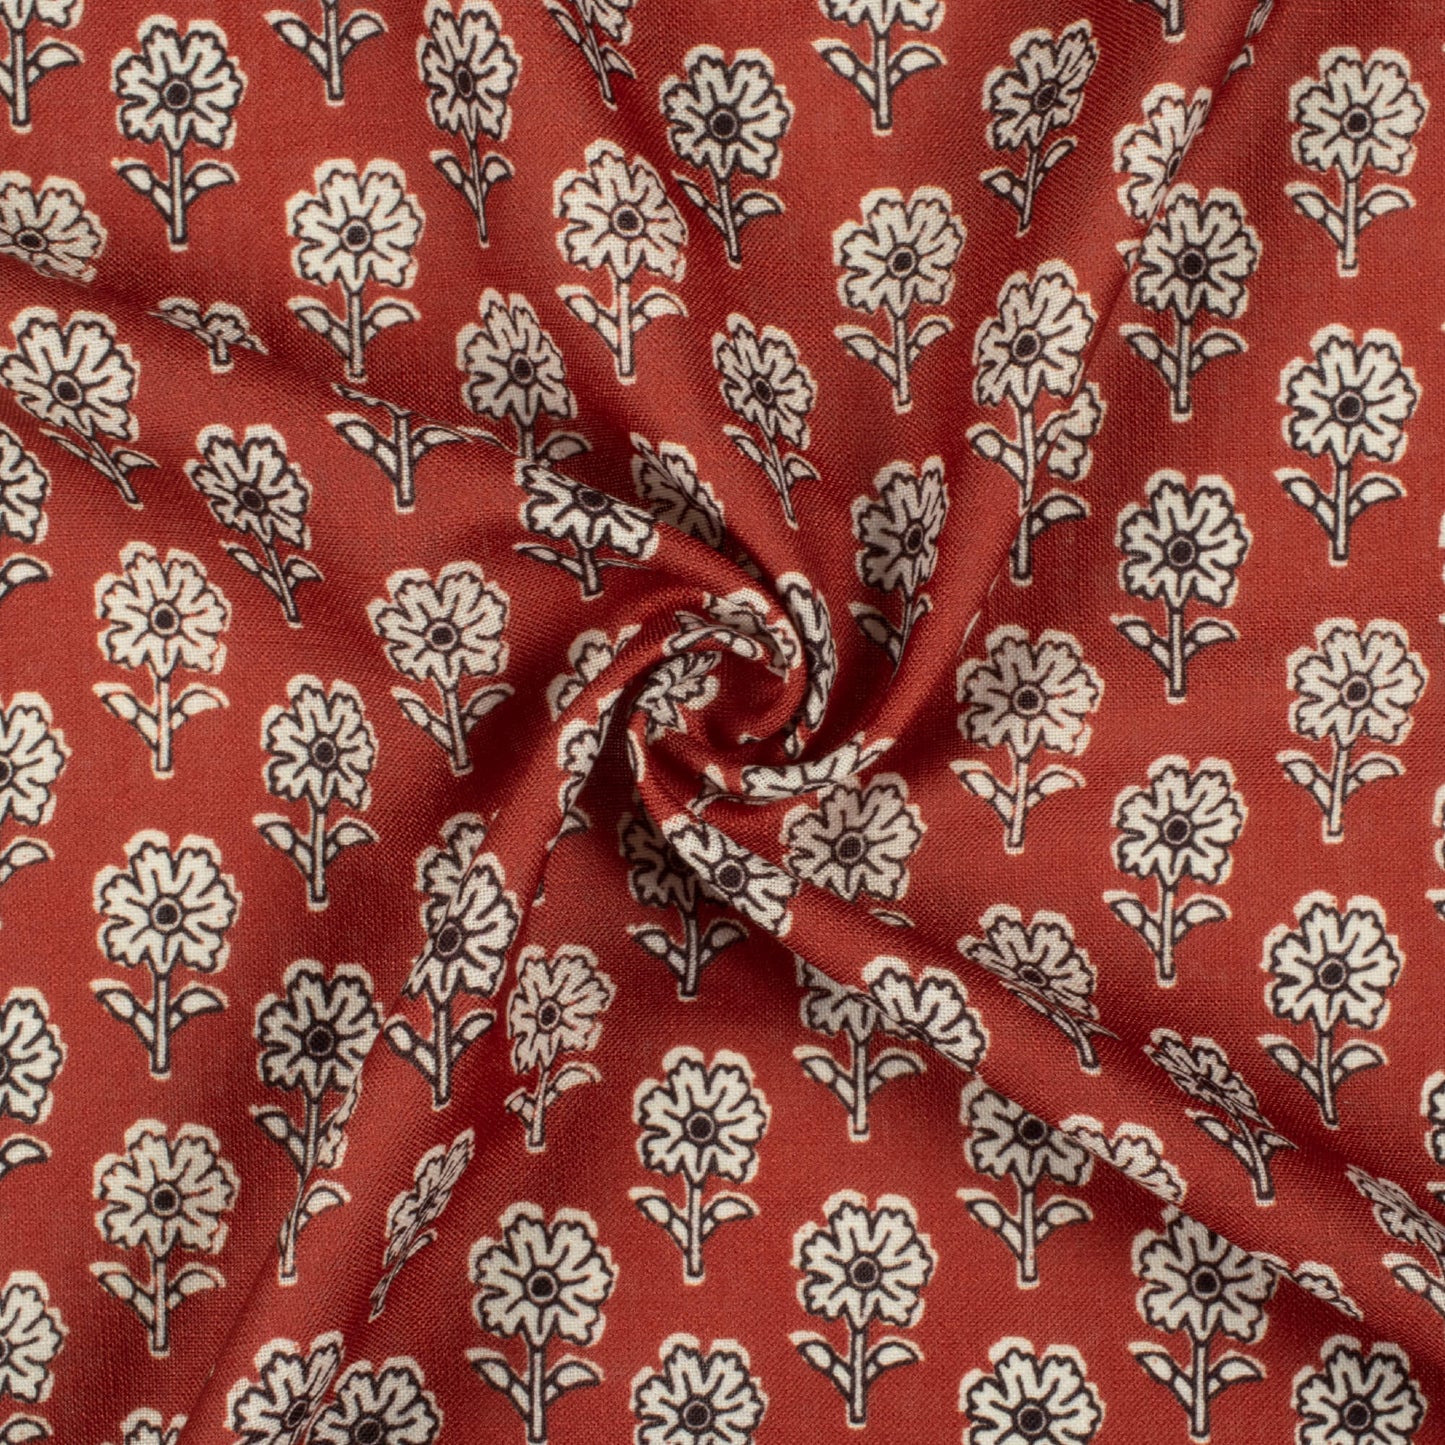 Sangria Red And Off White Floral Pattern Digital Print Linen Textured Fabric (Width 56 Inches)